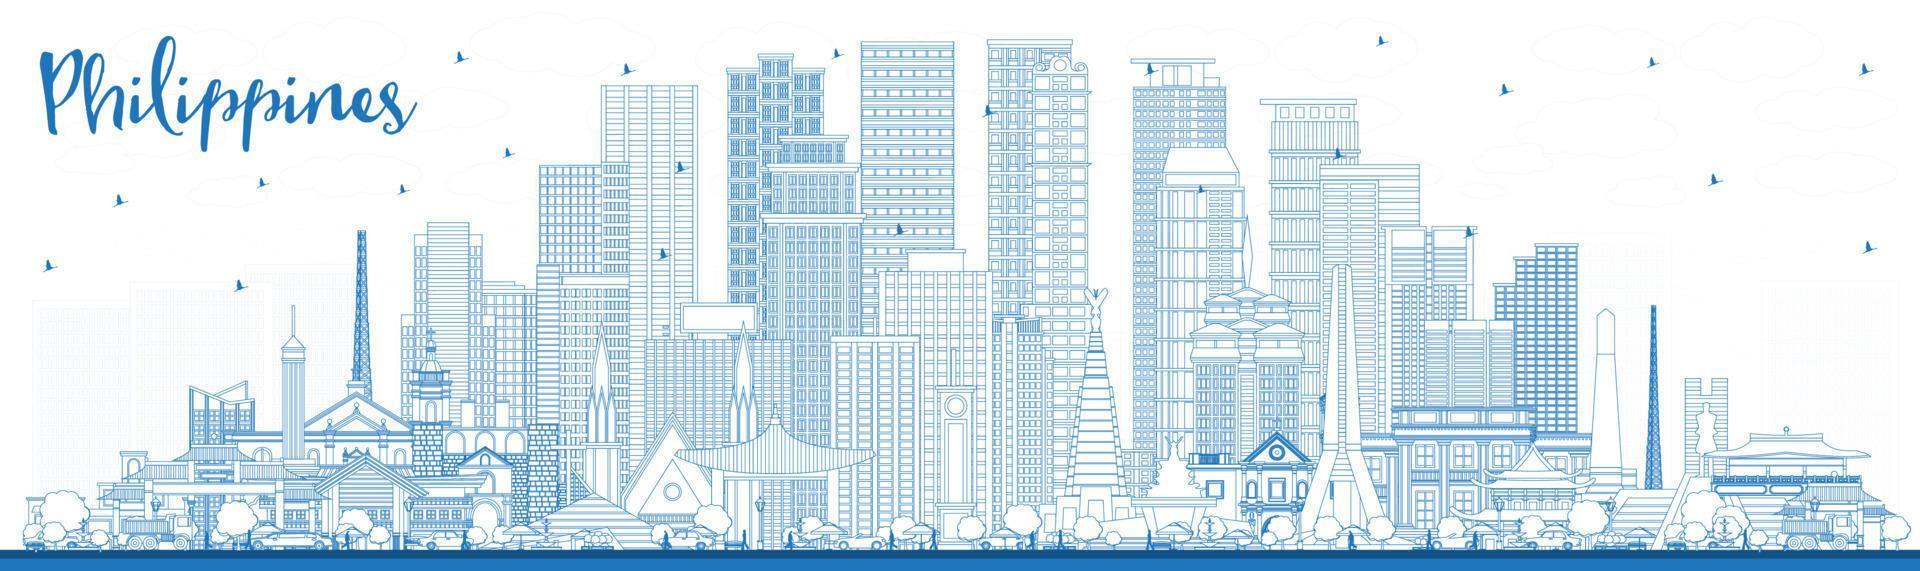 Outline Philippines City Skyline with Blue Buildings. vector